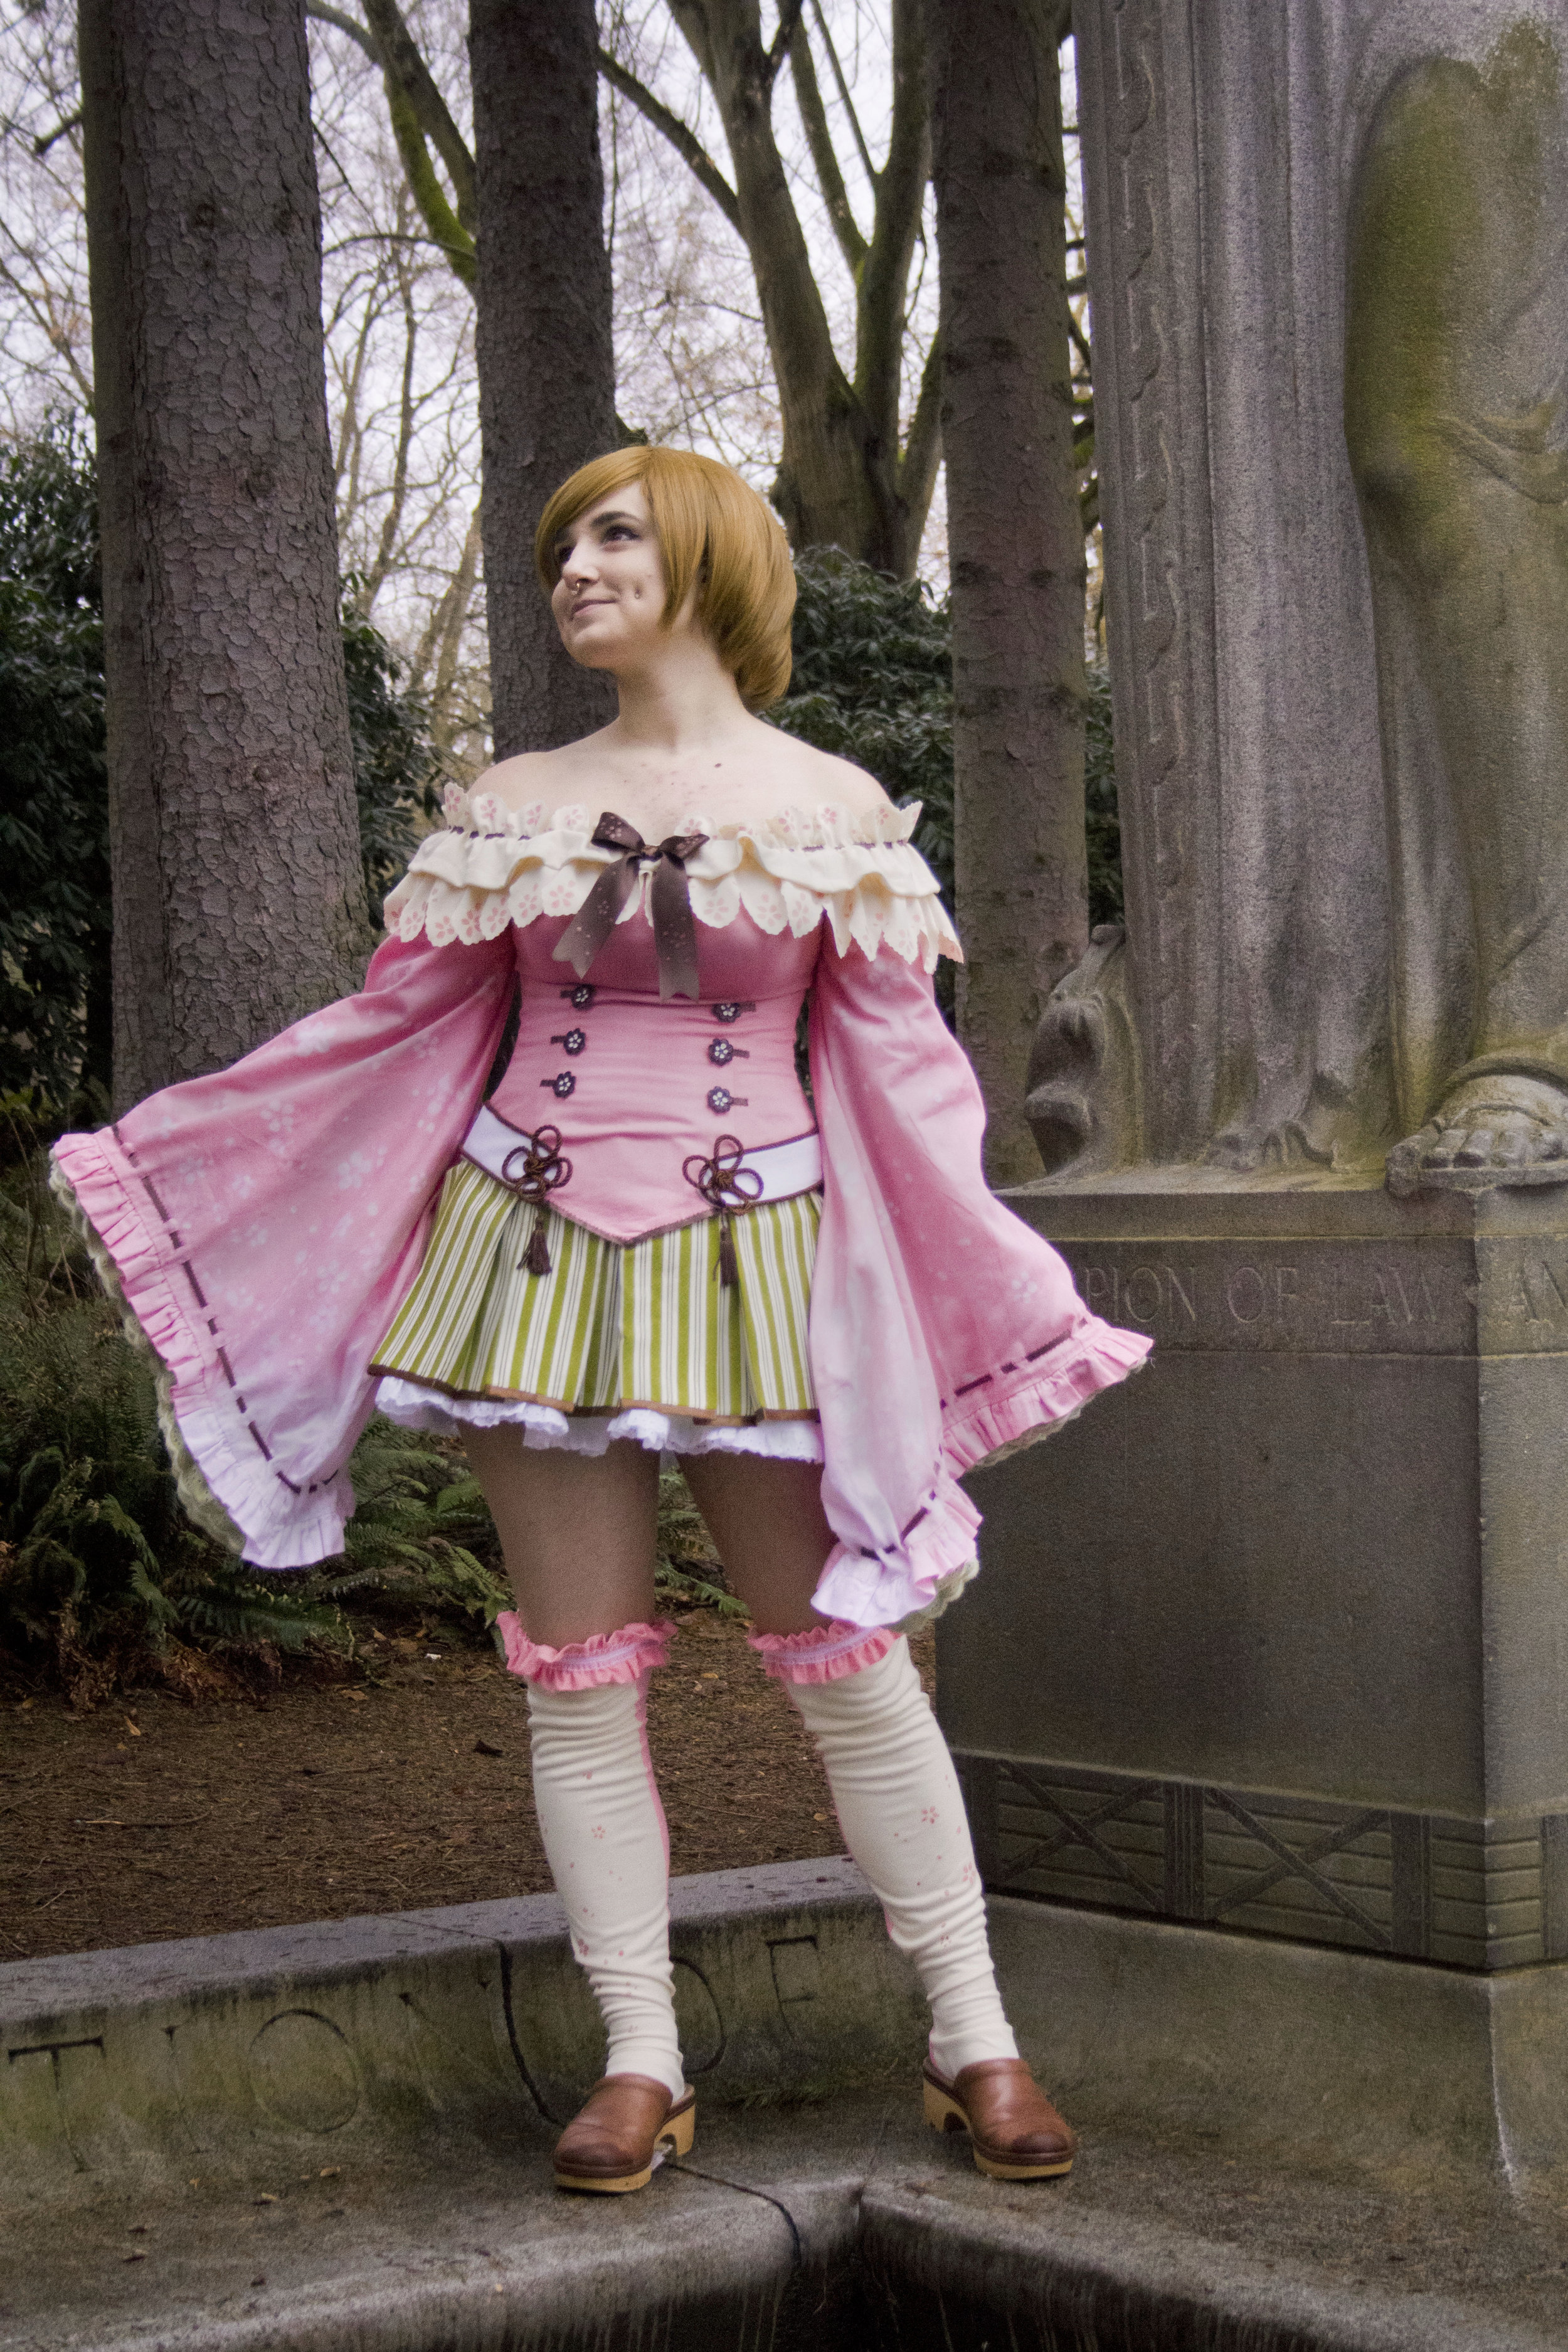  Character: Hanayo Koizumi (March UR) Series: Love Live: School Idol Festival Photographer: Keegan Wreden Won award for Best Workmanship in the Novice Division at Anime Los Angeles Cosplay Contest Winter 2016 